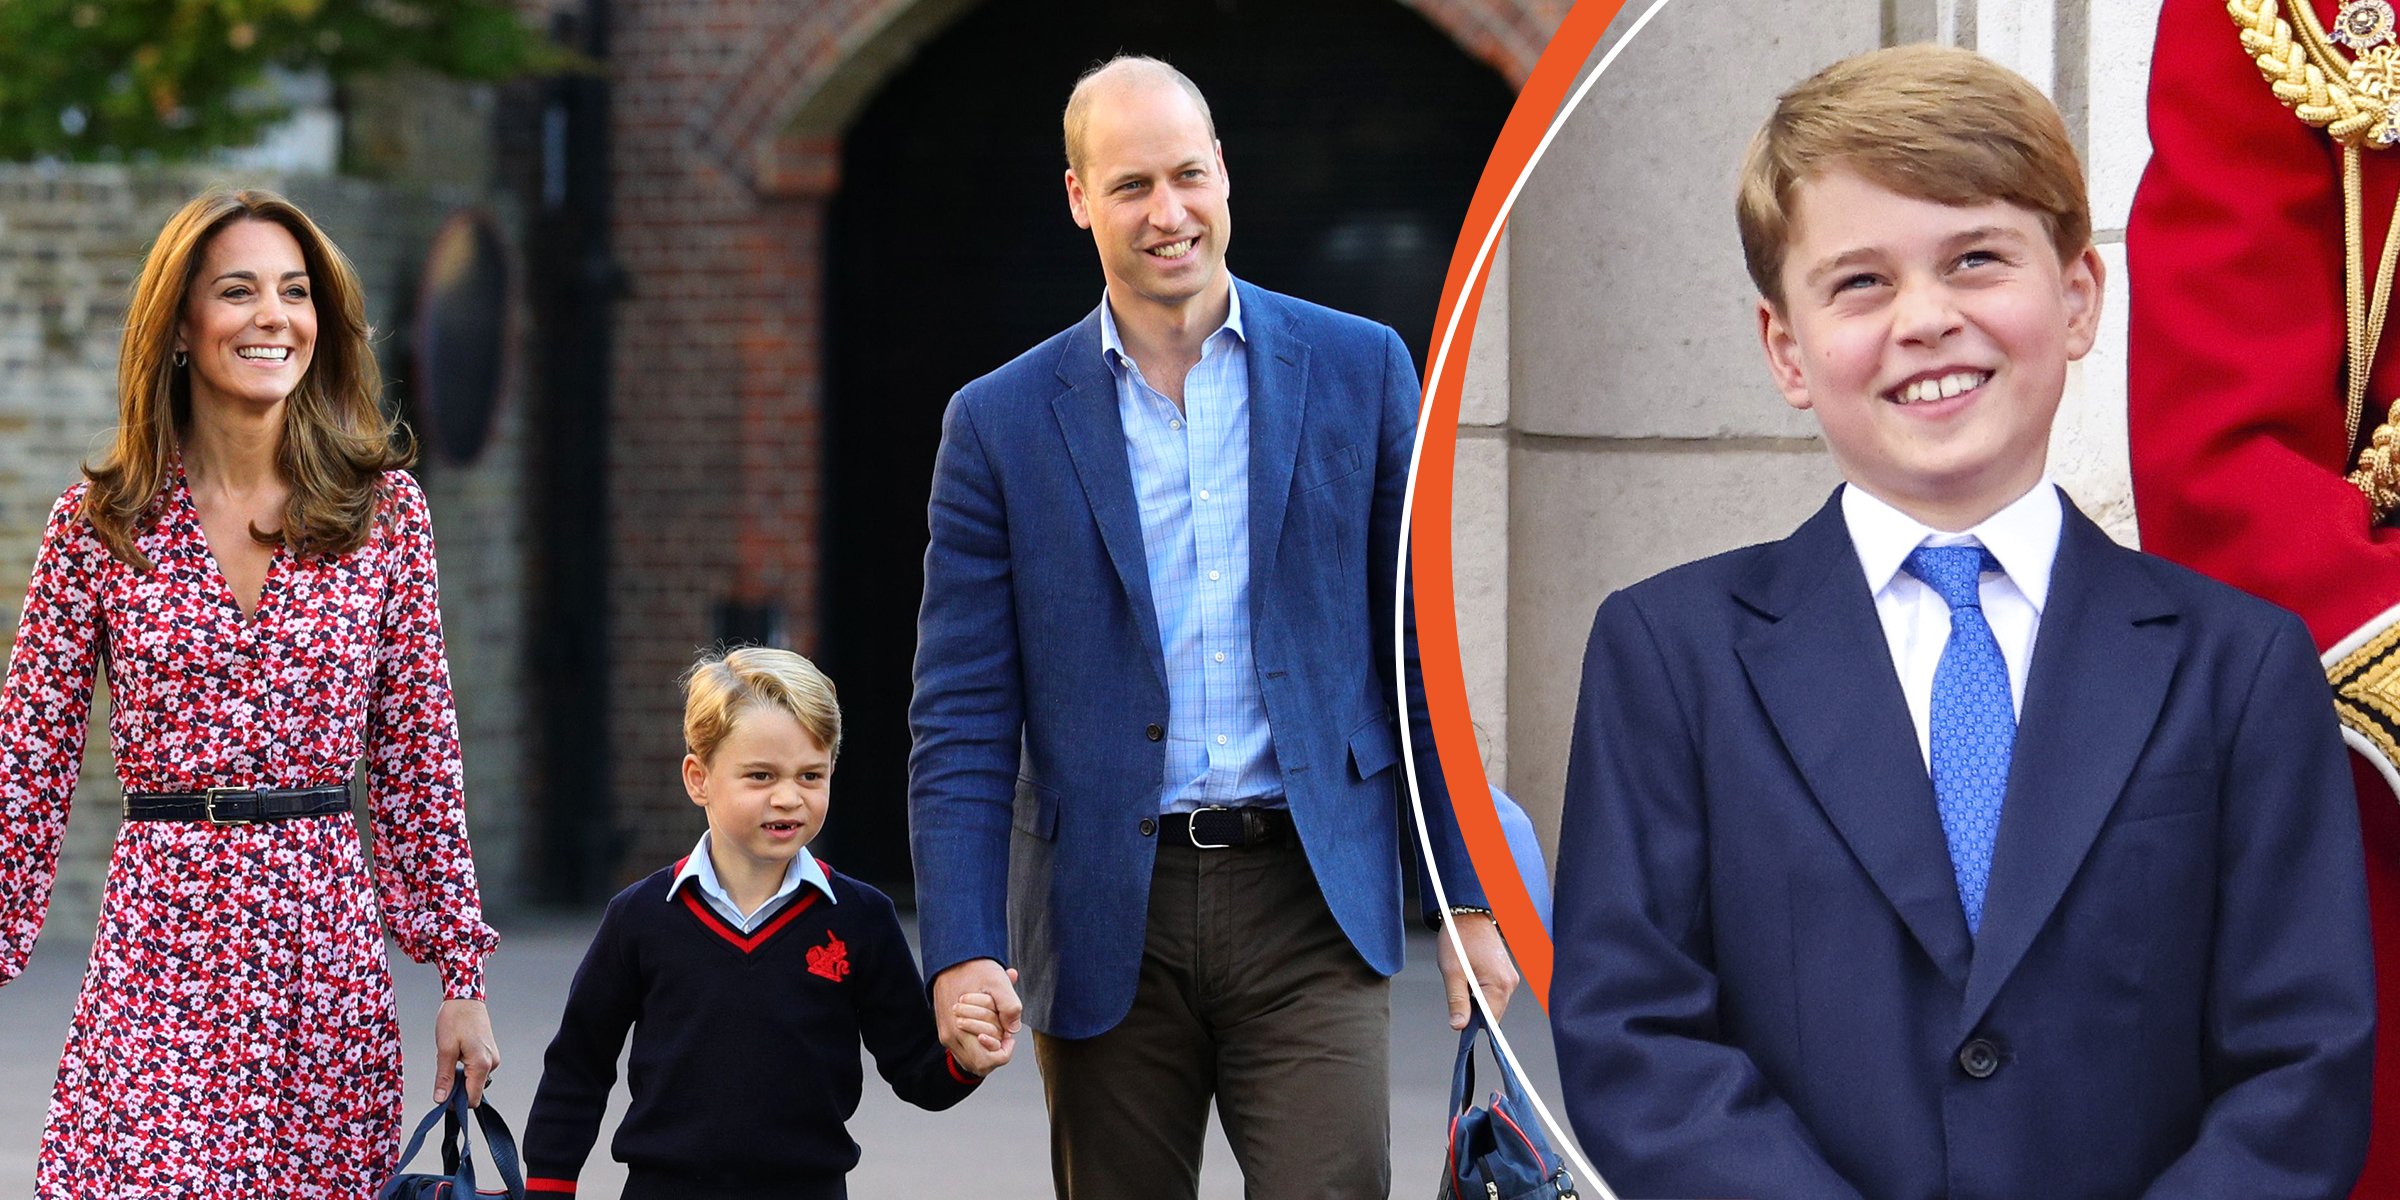 Kate Middleton, Prince George and Prince William | Prince George | Source: Getty Images